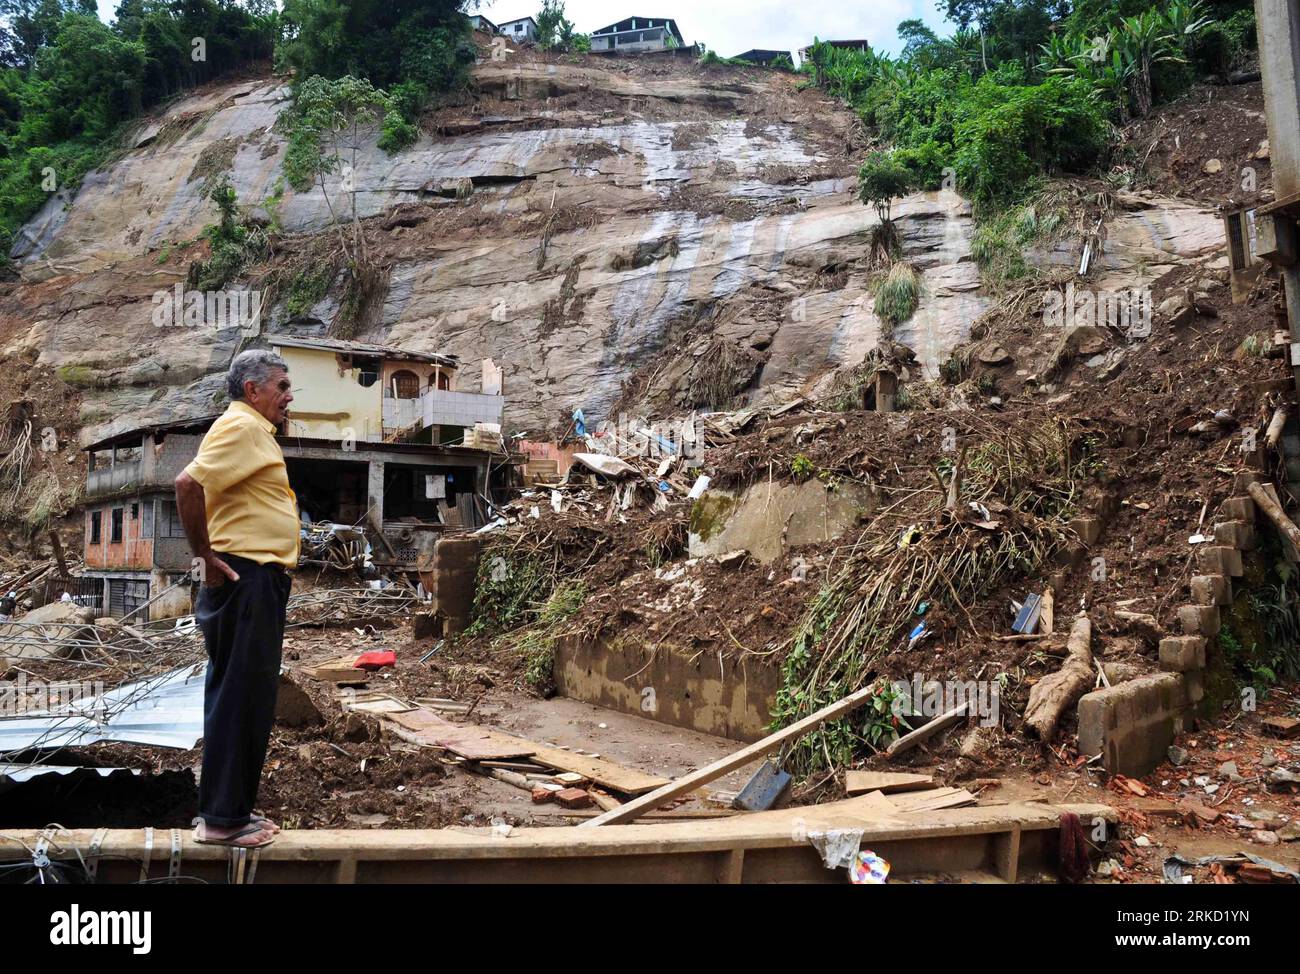 Bildnummer: 54844244  Datum: 22.01.2011  Copyright: imago/Xinhua (110122) -- NOVA FRIBURGO, Jan. 22, 2011 (Xinhua) -- A man looks at the debris left by landslides and floods in the municipality of Nova Friburgo, in Rio de Janeiro, Brazil, Jan. 22, 2011. Brazil will create a nationwide disaster-prevention and early-warning system after the floods and landslides that killed more than 760 in several towns in Rio de Janeiro state. (Xinhua/Agencia Estado) (BRAZIL OUT) (wjd) BRAZIL-FLOOD-LANDSLIDE-PREVENTION-WARNING-SYSTEM PUBLICATIONxNOTxINxCHN Gesellschaft kbdig xkg 2011 quer o0  Naturkatastrophe Stock Photo